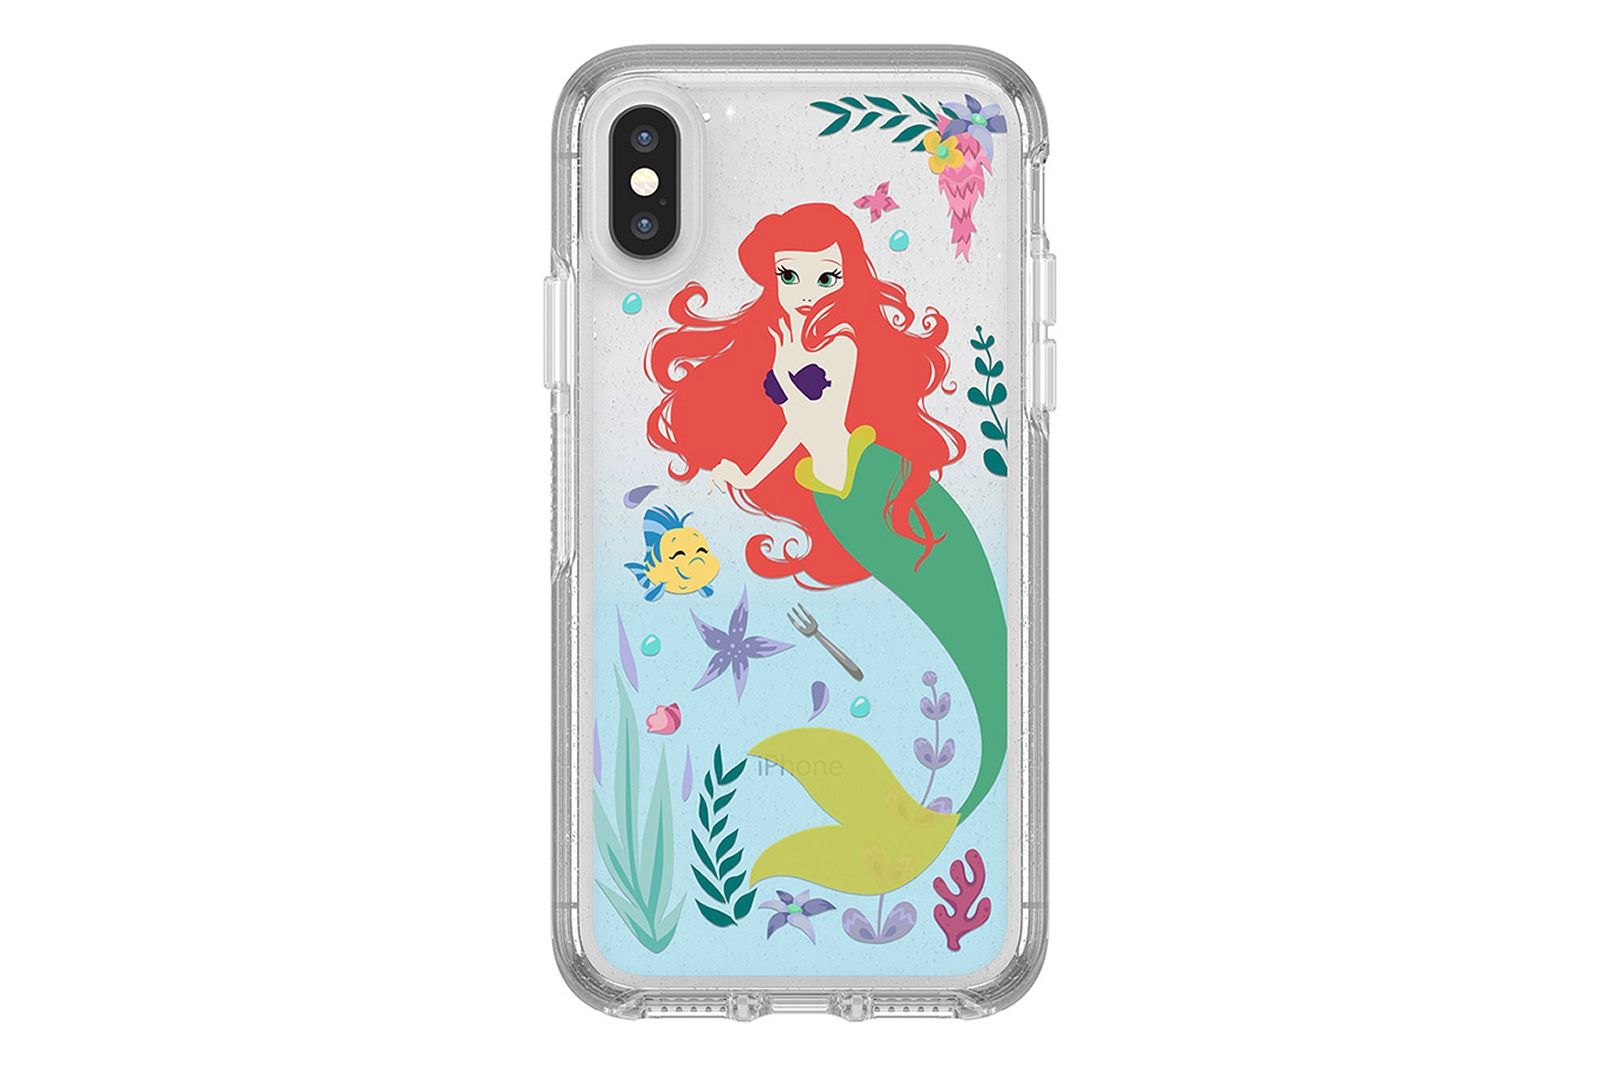 Best Disney Otterbox cases Protection fit for a Princess or a mouse image 4